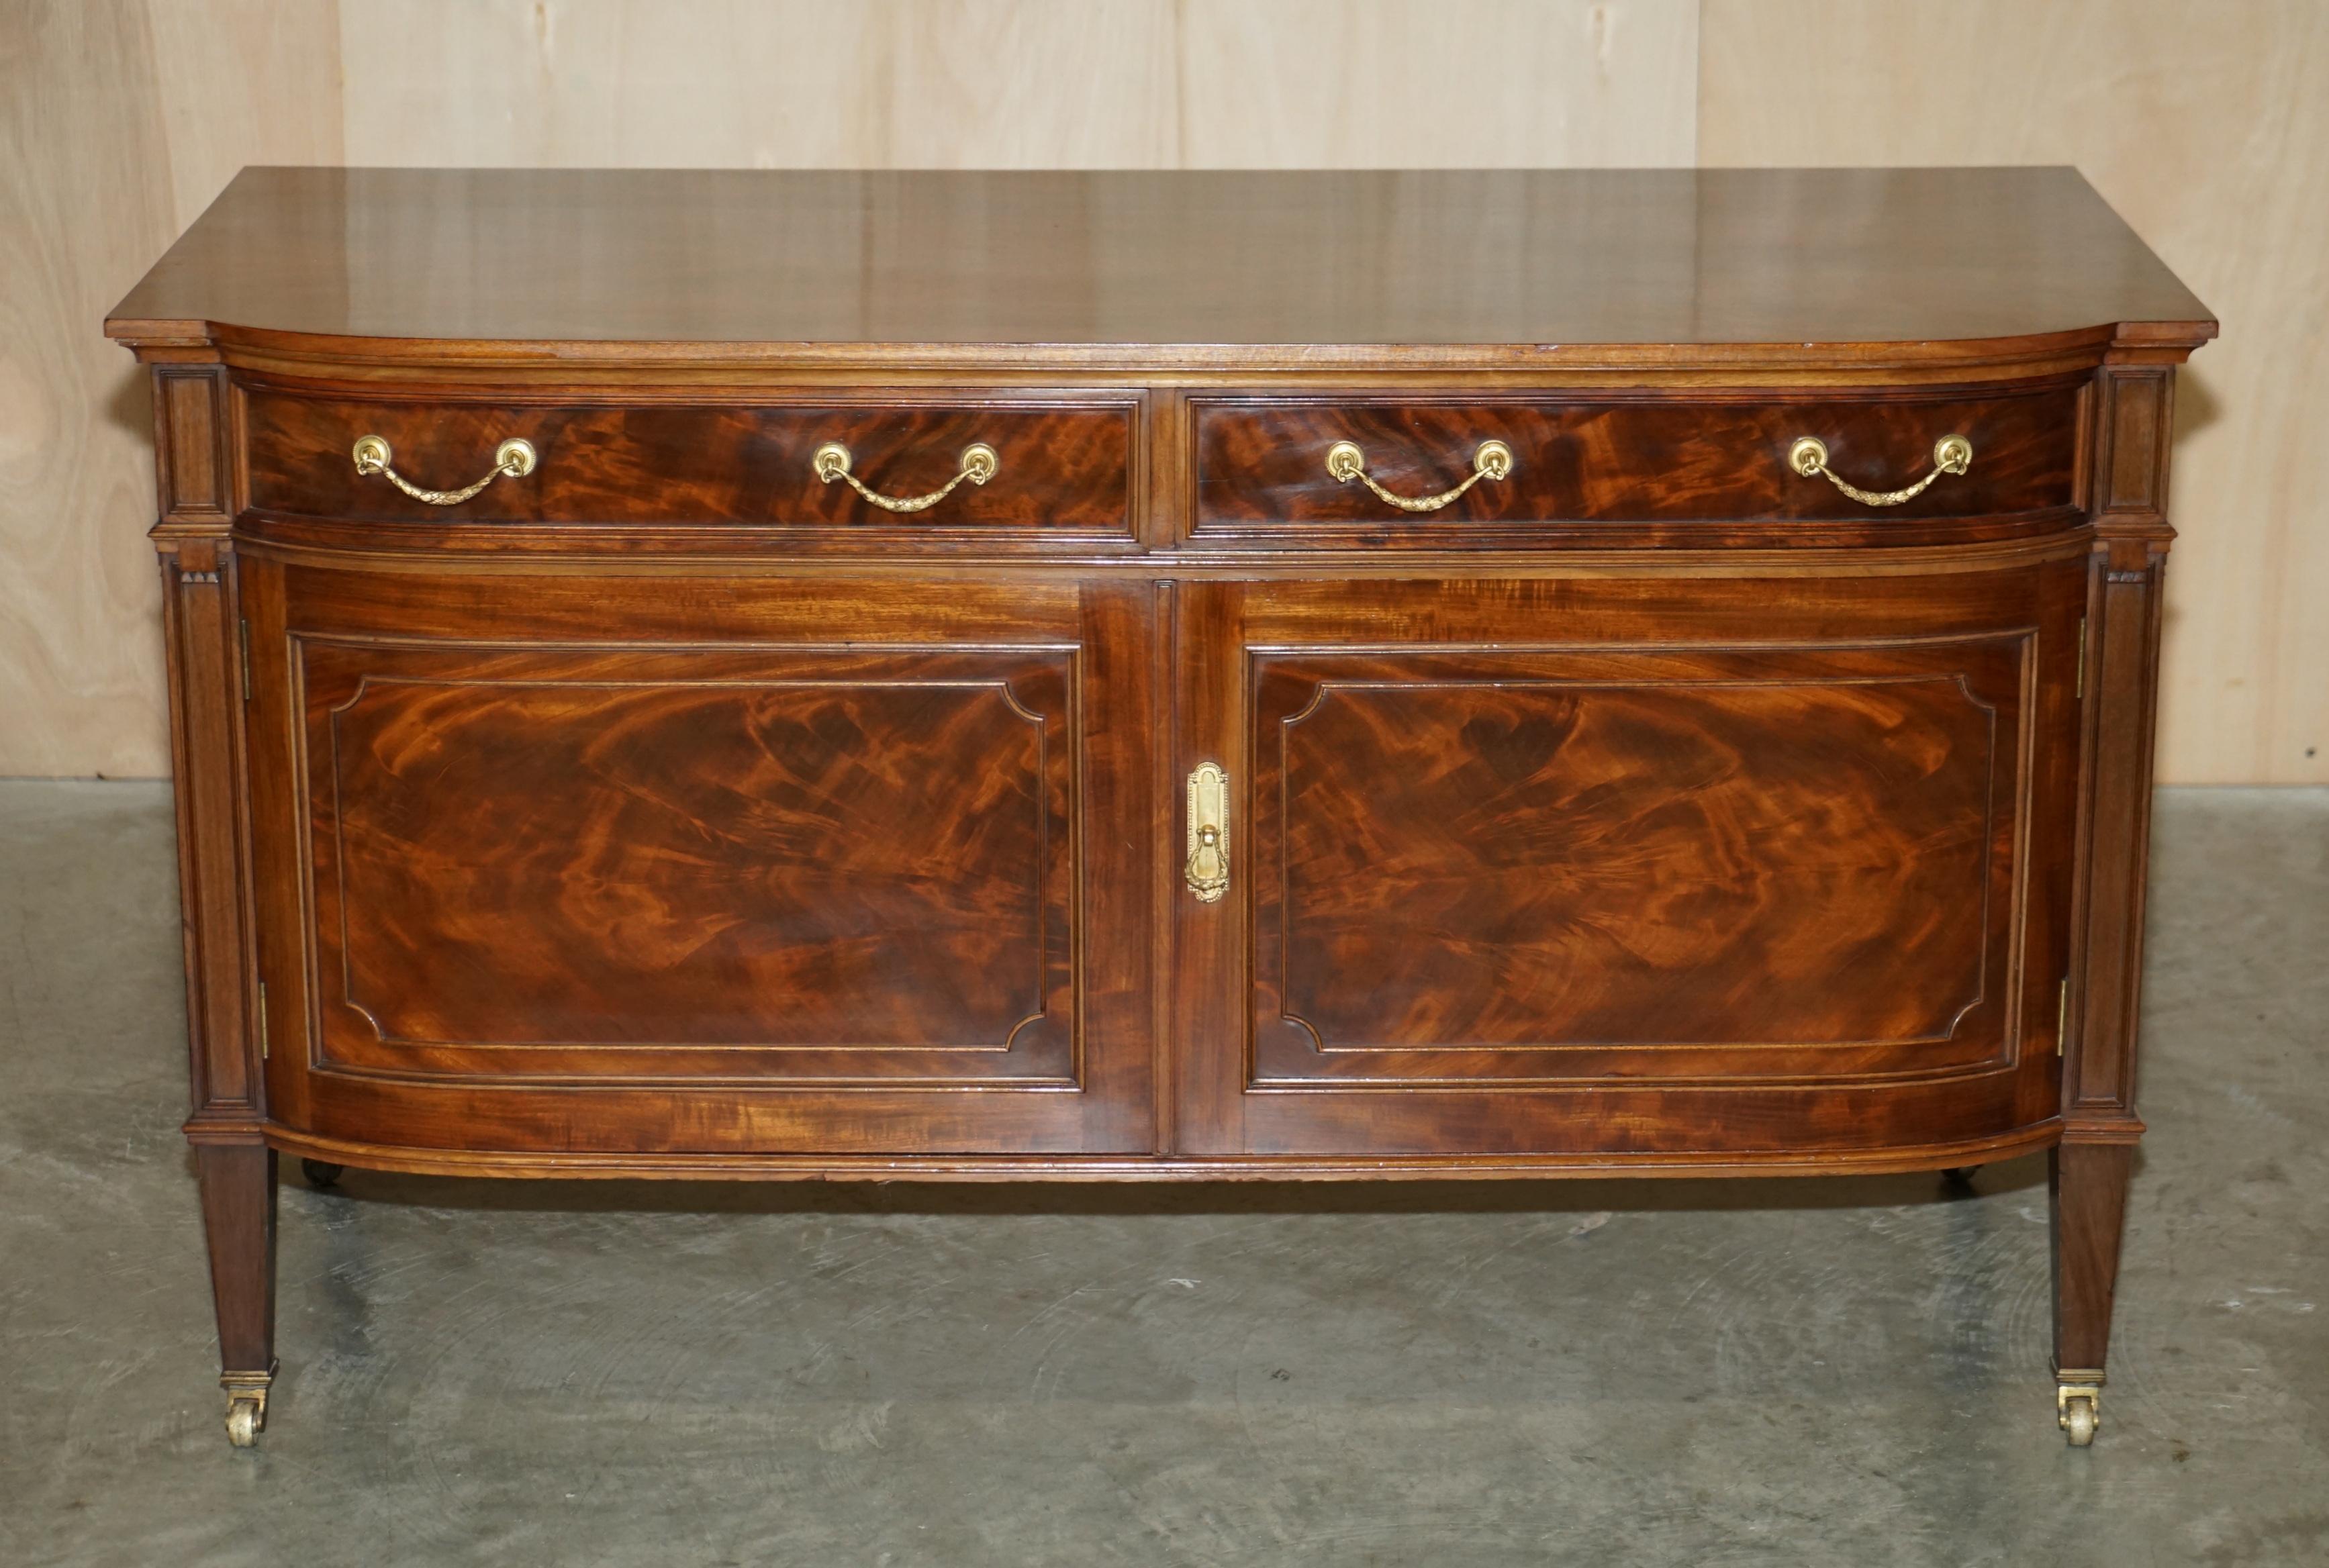 We are delighted to offer for sale this absolutely stunning, fully restored, luxury flamed mahogany Howard & Son’s Berners street, fully stamped sideboard.

A very well made decorative and utilitarian piece. It can be used as a kitchen dining